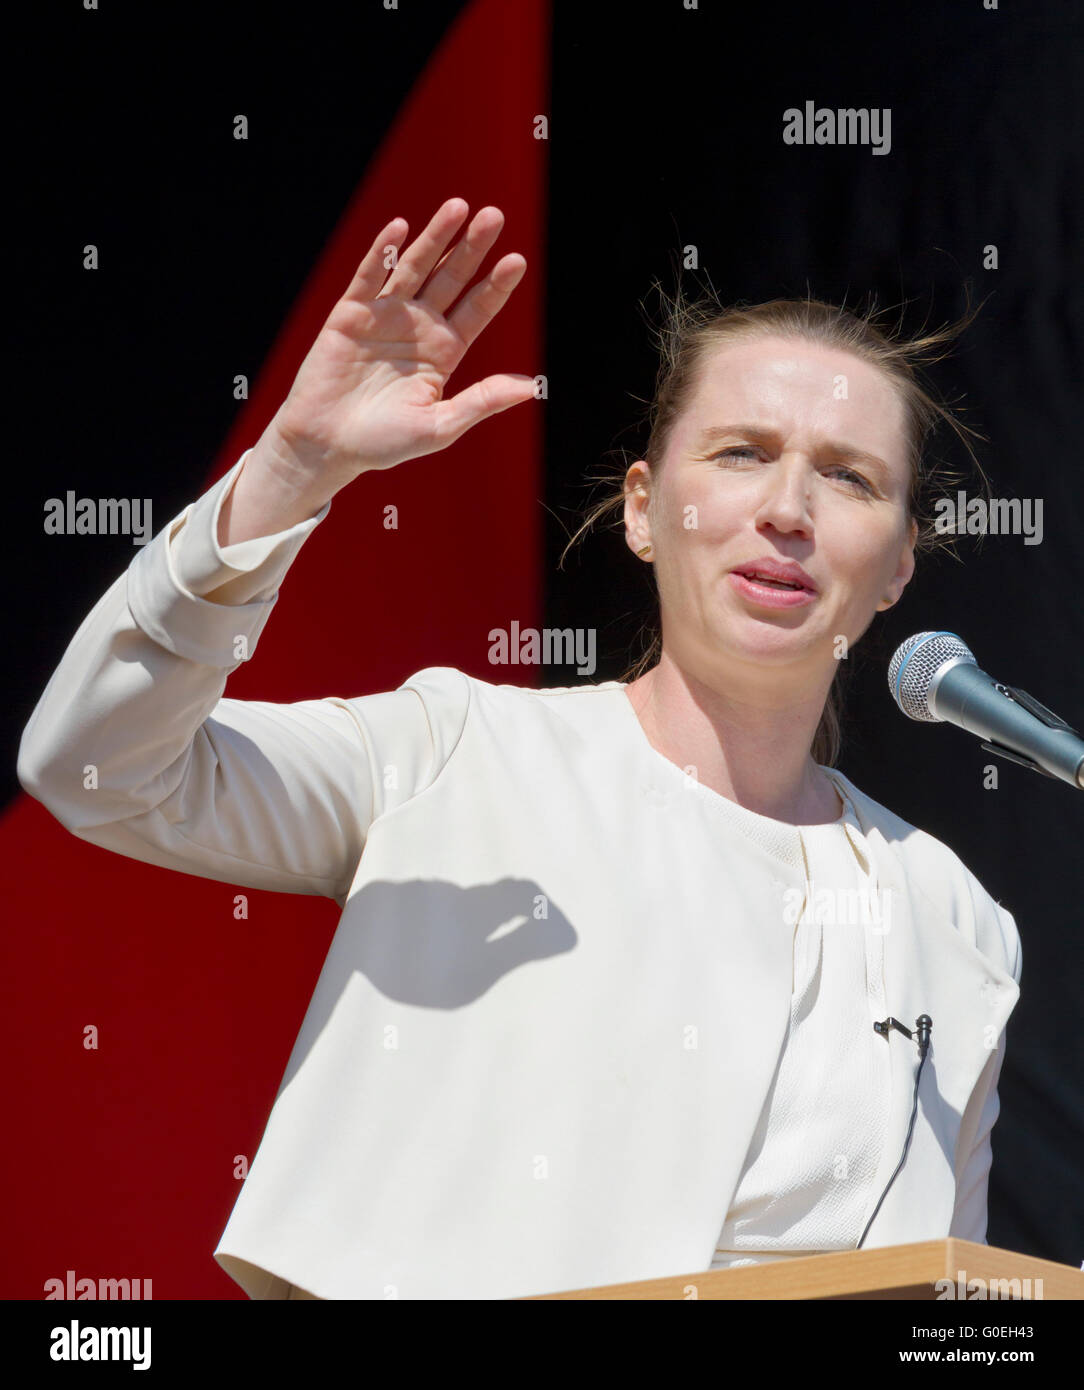 Copenhagen, Denmark, 1st May, 2016. Member of Parliament and leader of the largest party in the Danish parliament, The Social Democrats, Mette Frederiksen, delivered as the opposition leader a very popular speech  at The International Workers’ Day (Labour Day) in Faelledparken, the Copenhagen Common. A popular campaign and festival day full of political speeches and entertainment. Credit:  Niels Quist/Alamy Live News Stock Photo